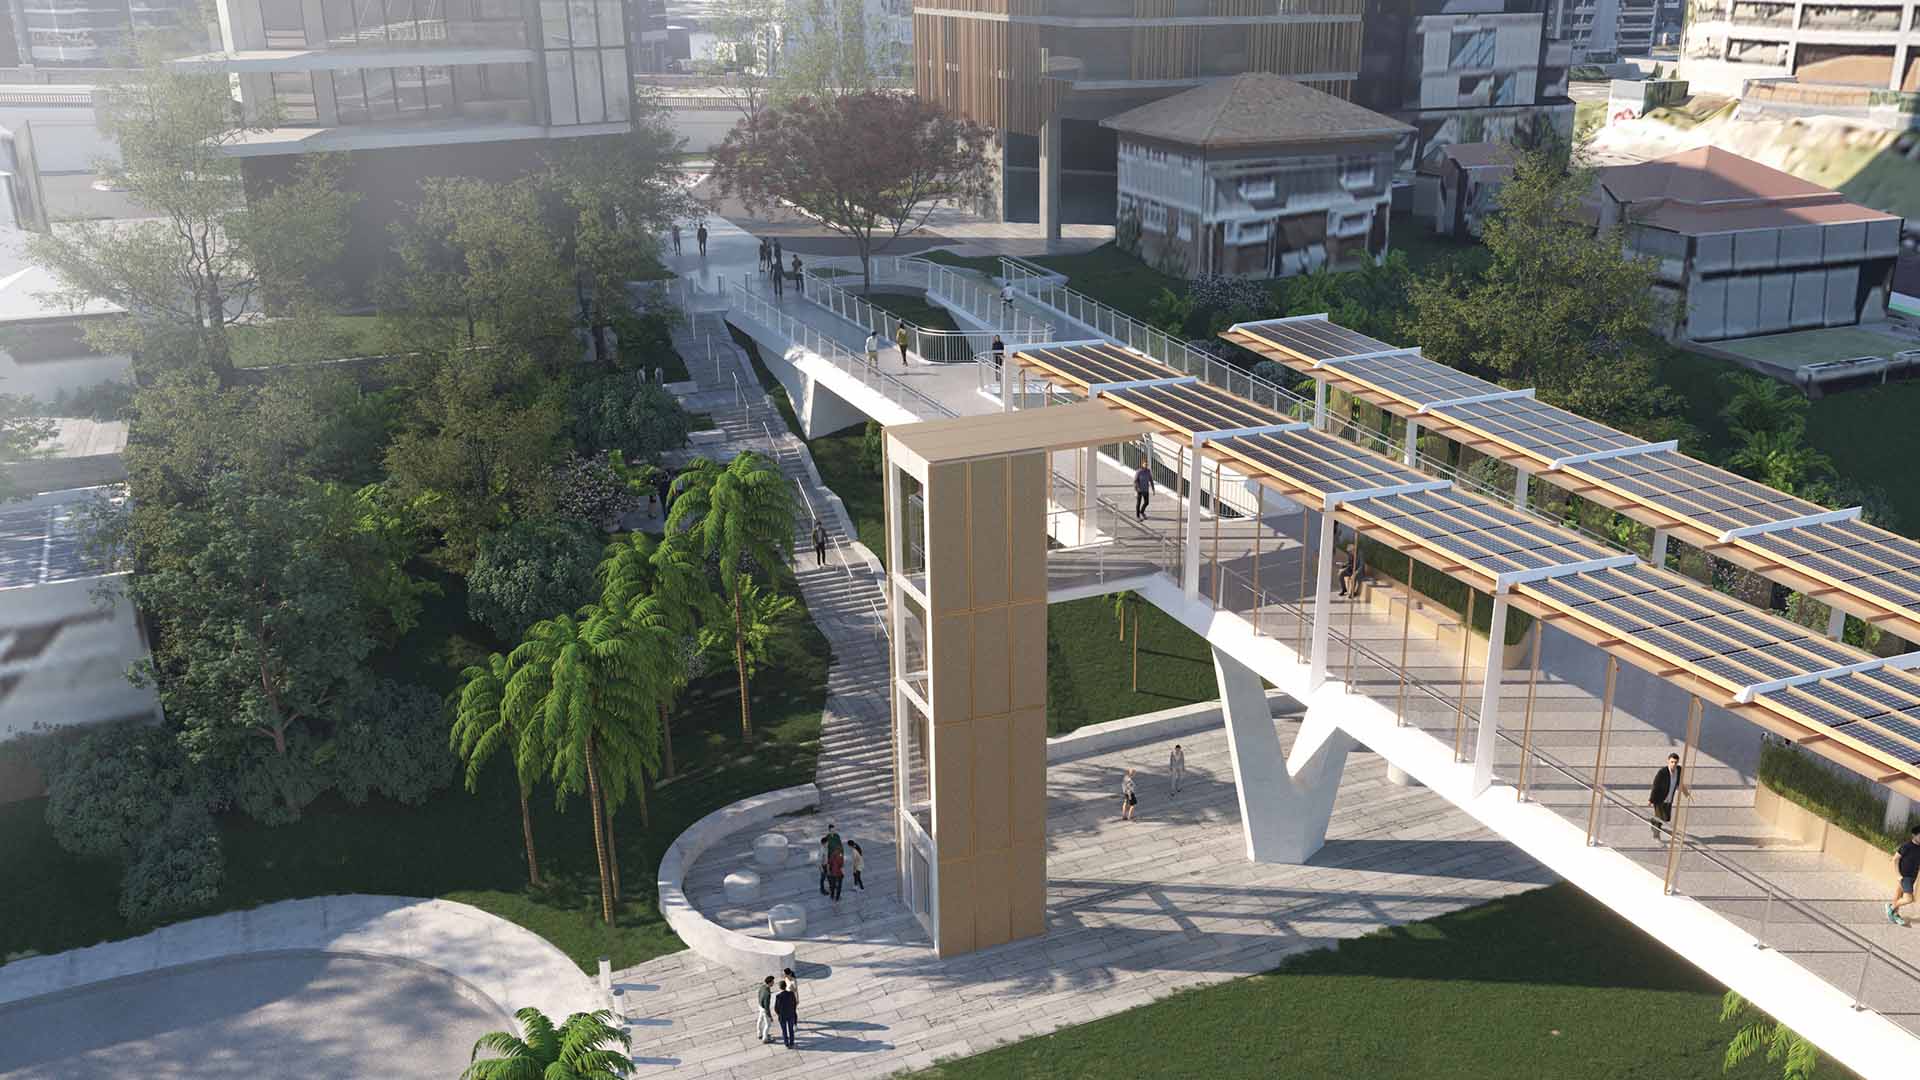 Kangaroo Point's New Green Bridge Is Set to Include an Overwater Bar and Restaurant